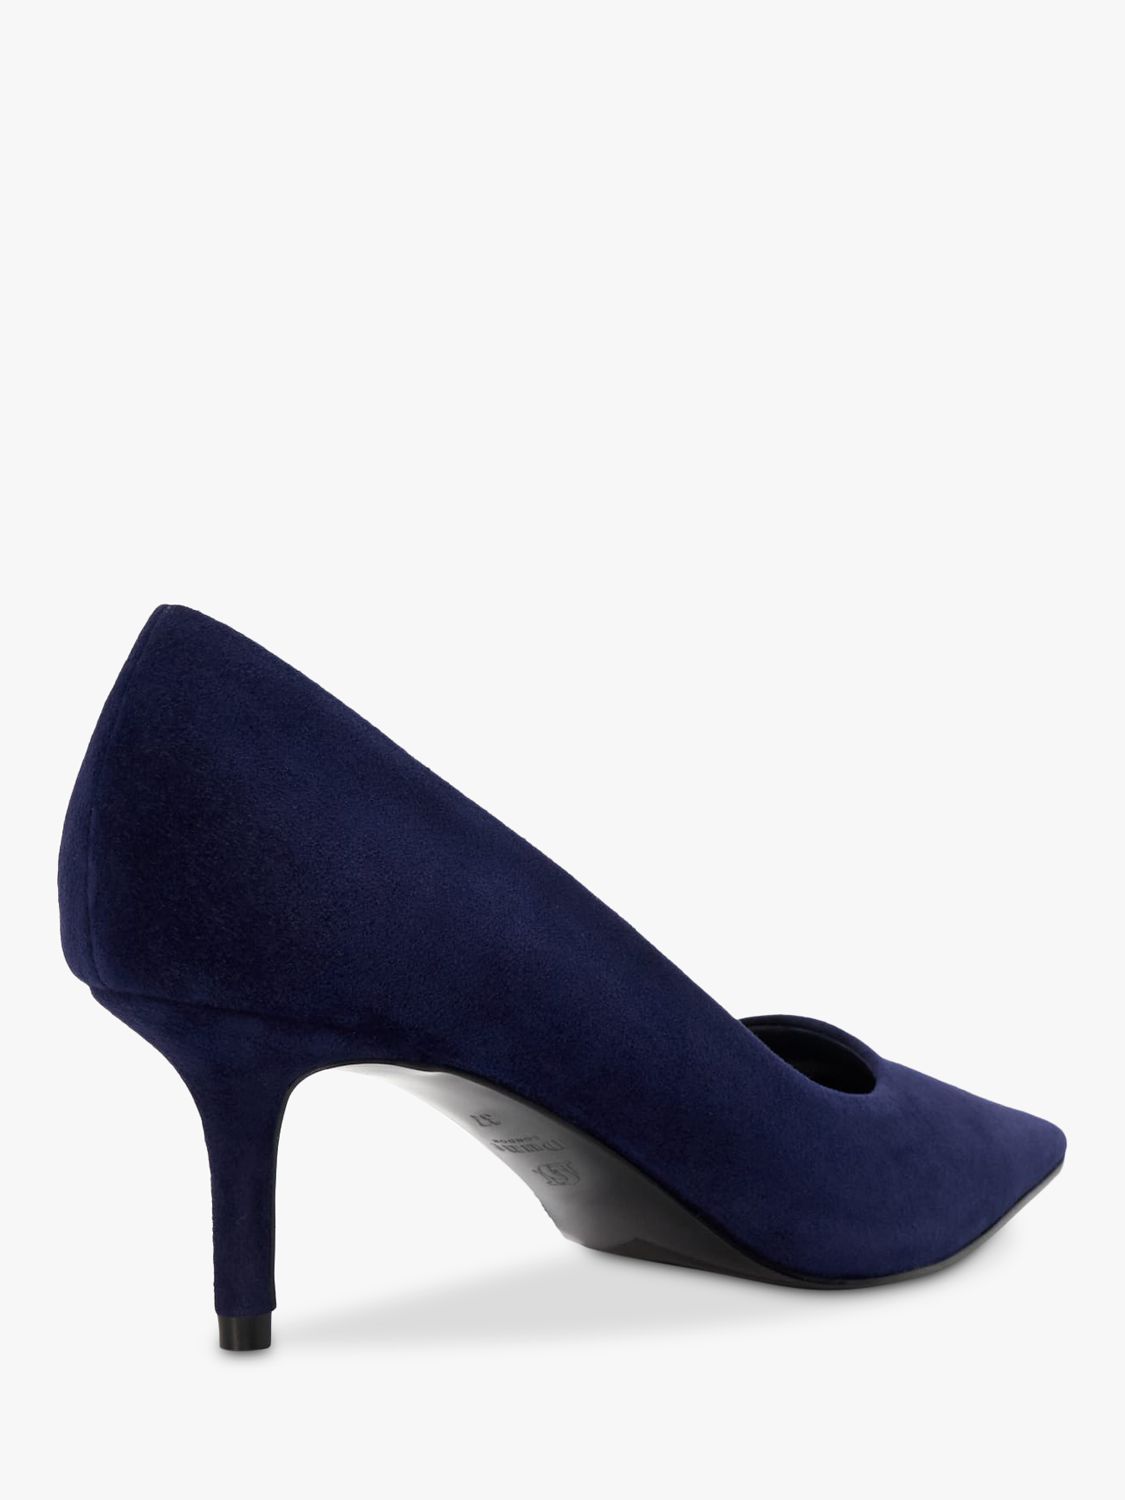 Buy Dune Absolute Suede Pointed Toe Court Shoes, Navy Online at johnlewis.com